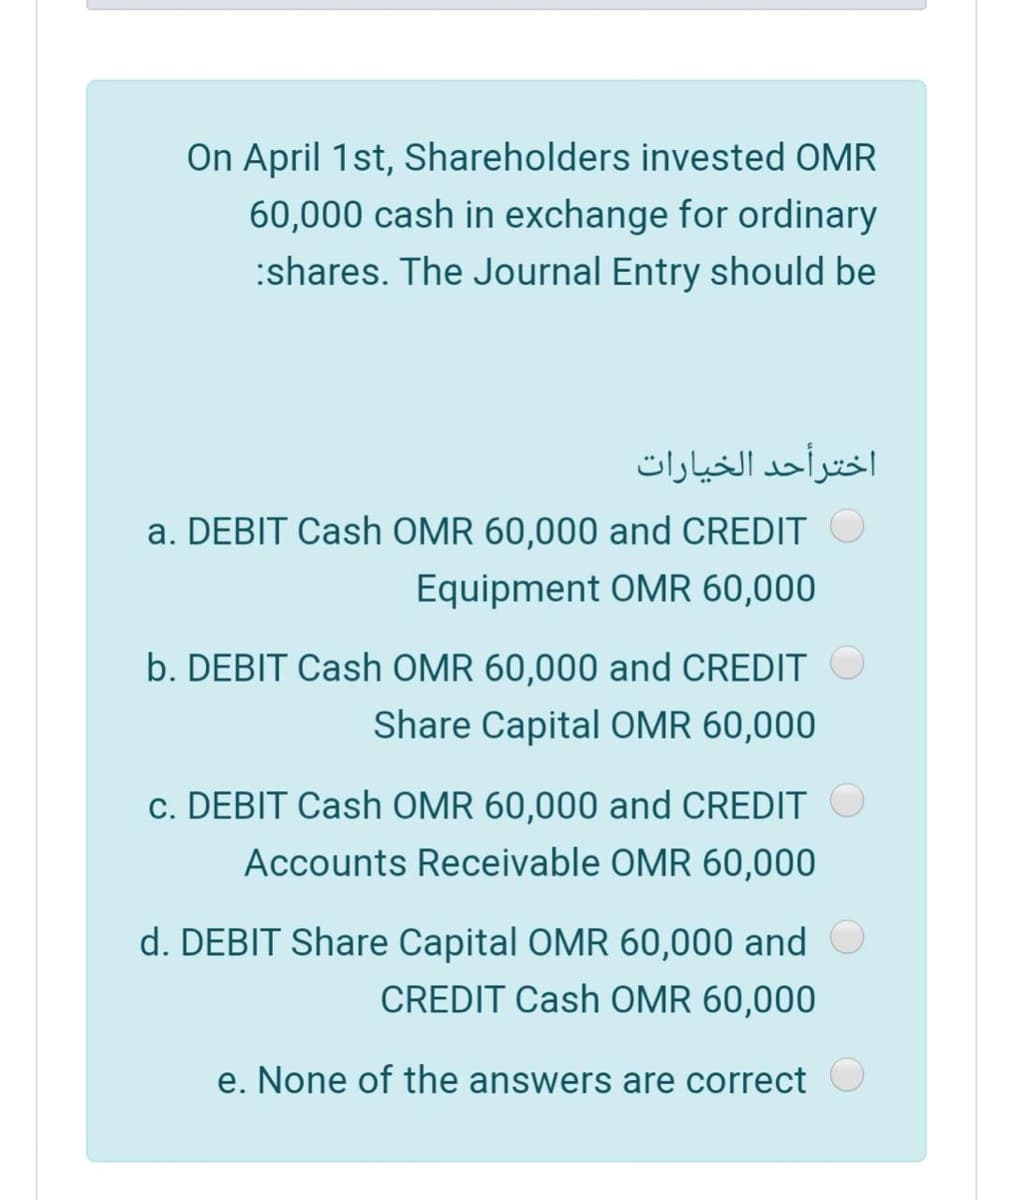 On April 1st, Shareholders invested OMR
60,000 cash in exchange for ordinary
:shares. The Journal Entry should be
اخترأحد الخیارات
a. DEBIT Cash OMR 60,000 and CREDIT
Equipment OMR 60,000
b. DEBIT Cash OMR 60,000 and CREDIT
Share Capital OMR 60,000
c. DEBIT Cash OMR 60,000 and CREDIT
Accounts Receivable OMR 60,000
d. DEBIT Share Capital OMR 60,000 and
CREDIT Cash OMR 60,000
e. None of the answers are correct
